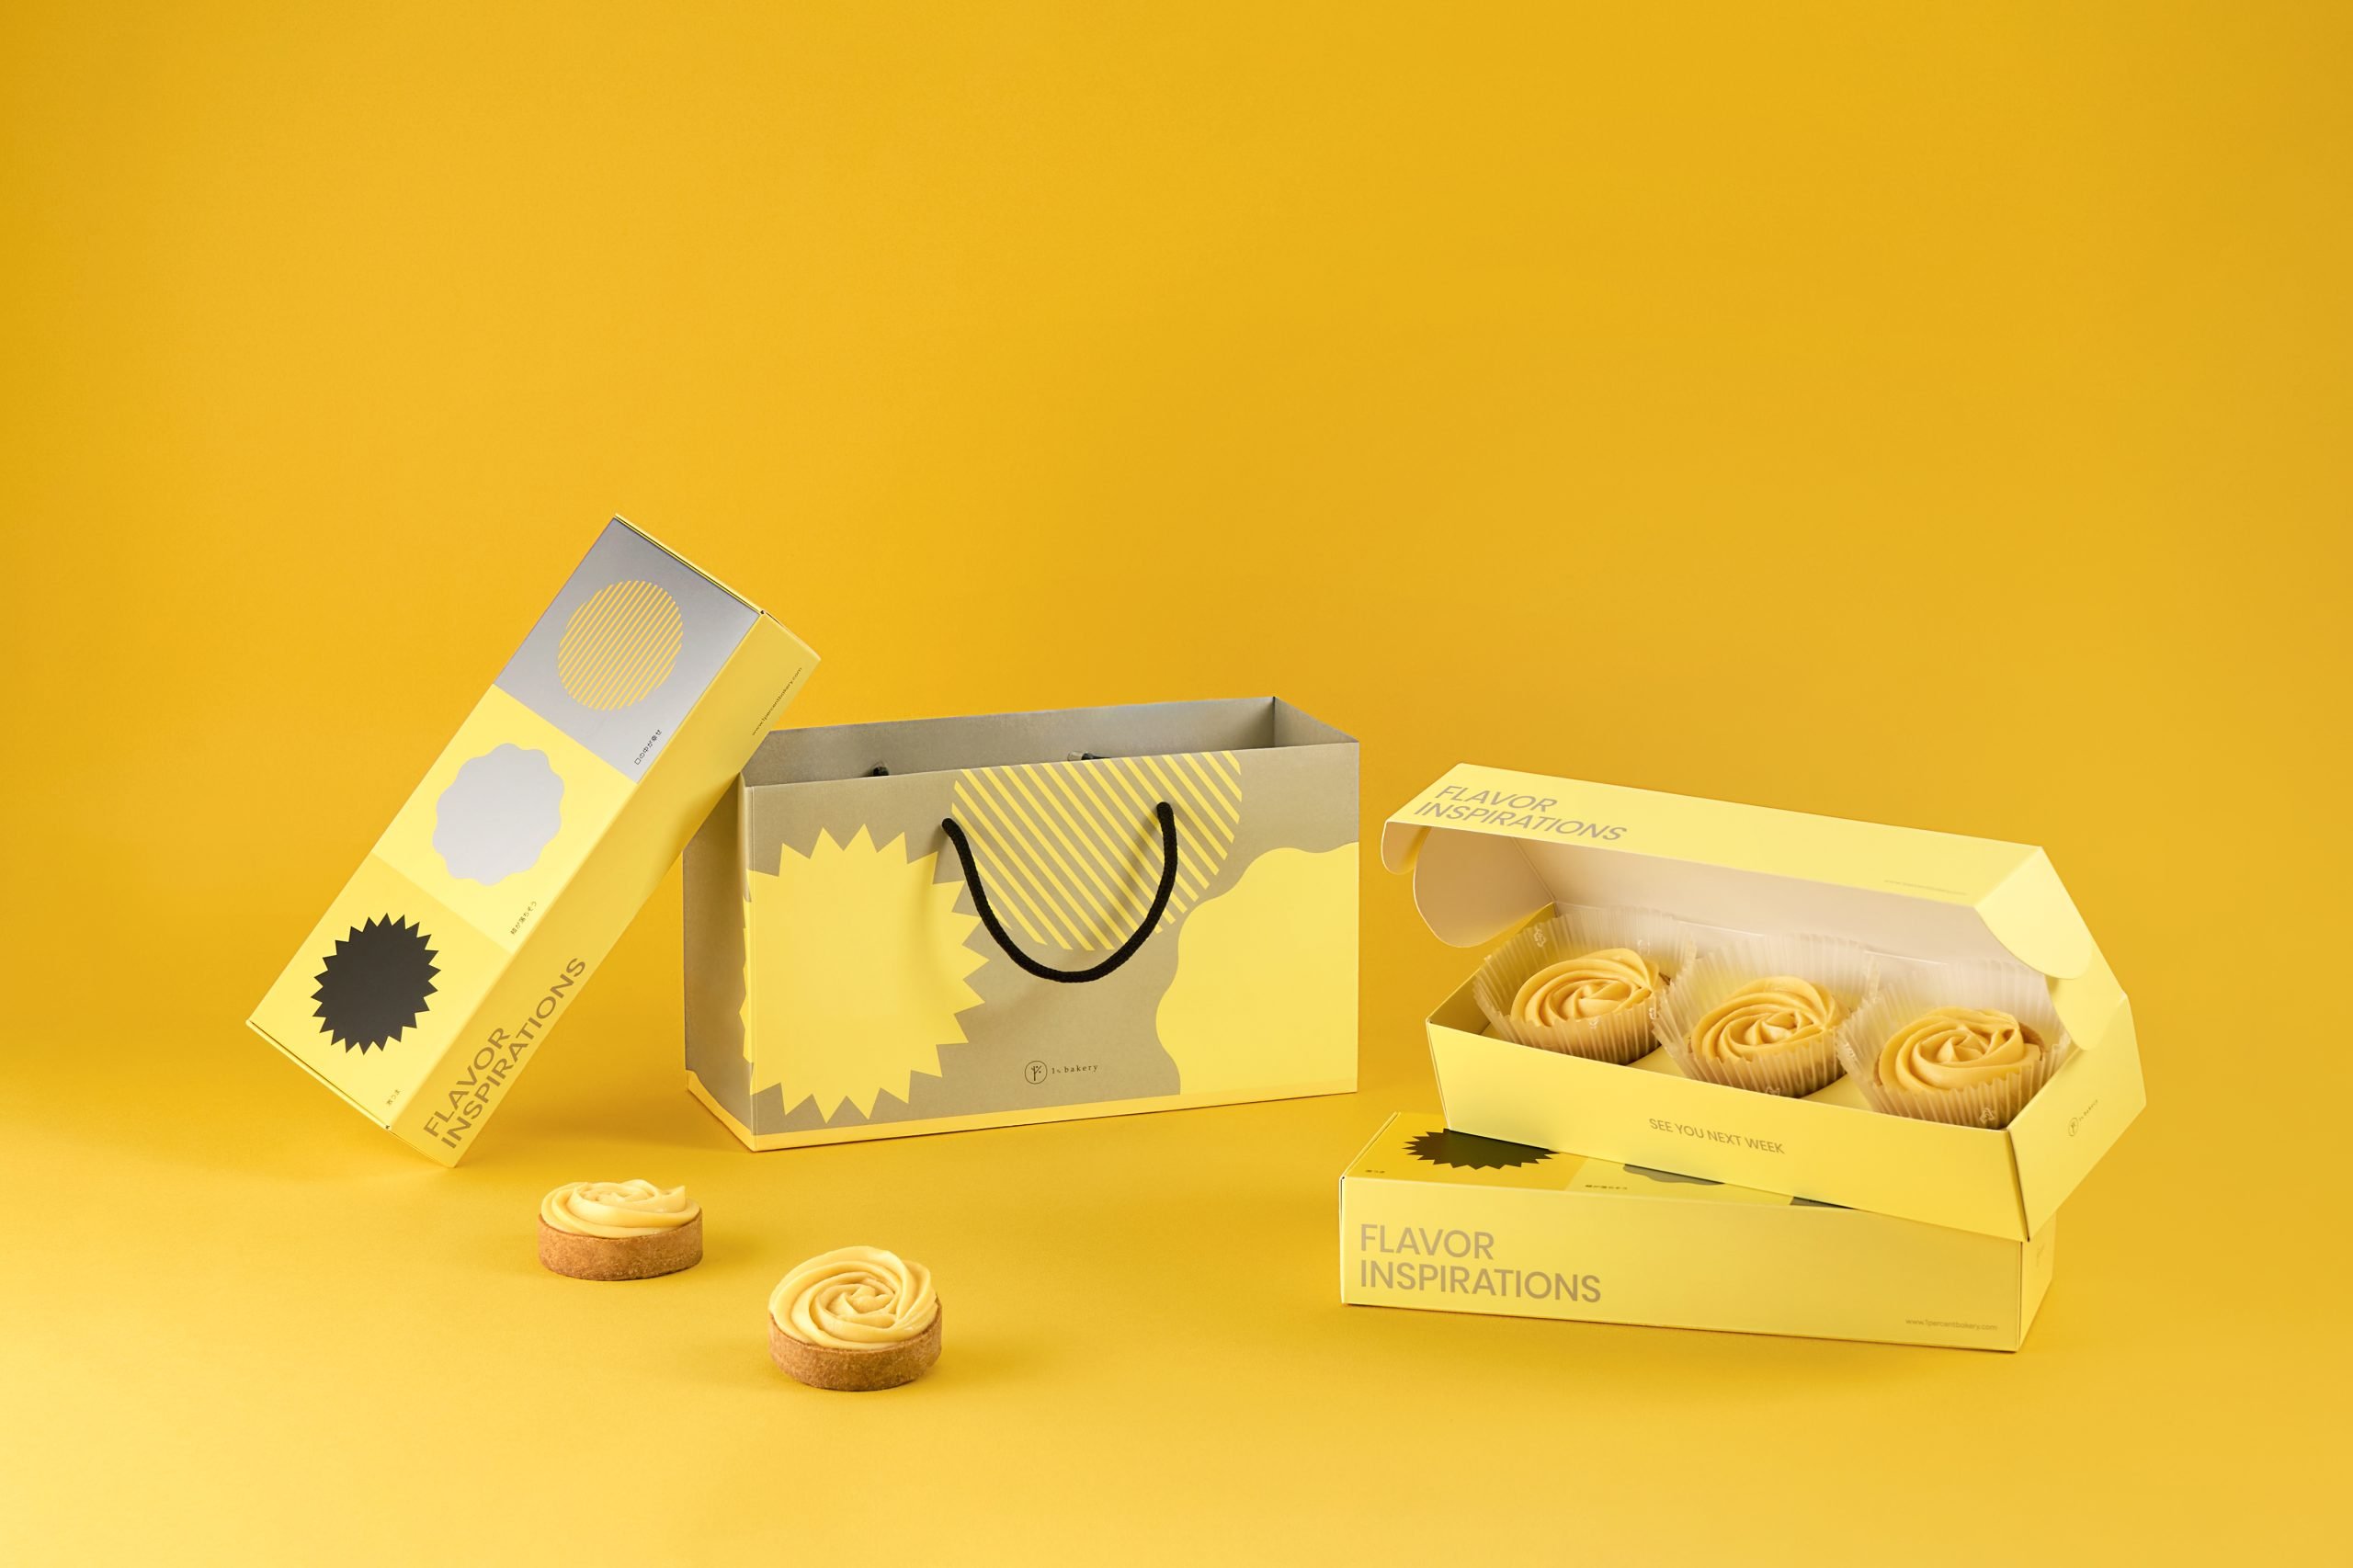 Studio Pros Design Adds Sunny Style to 1% Bakery’s Appetizing Yellow Pies